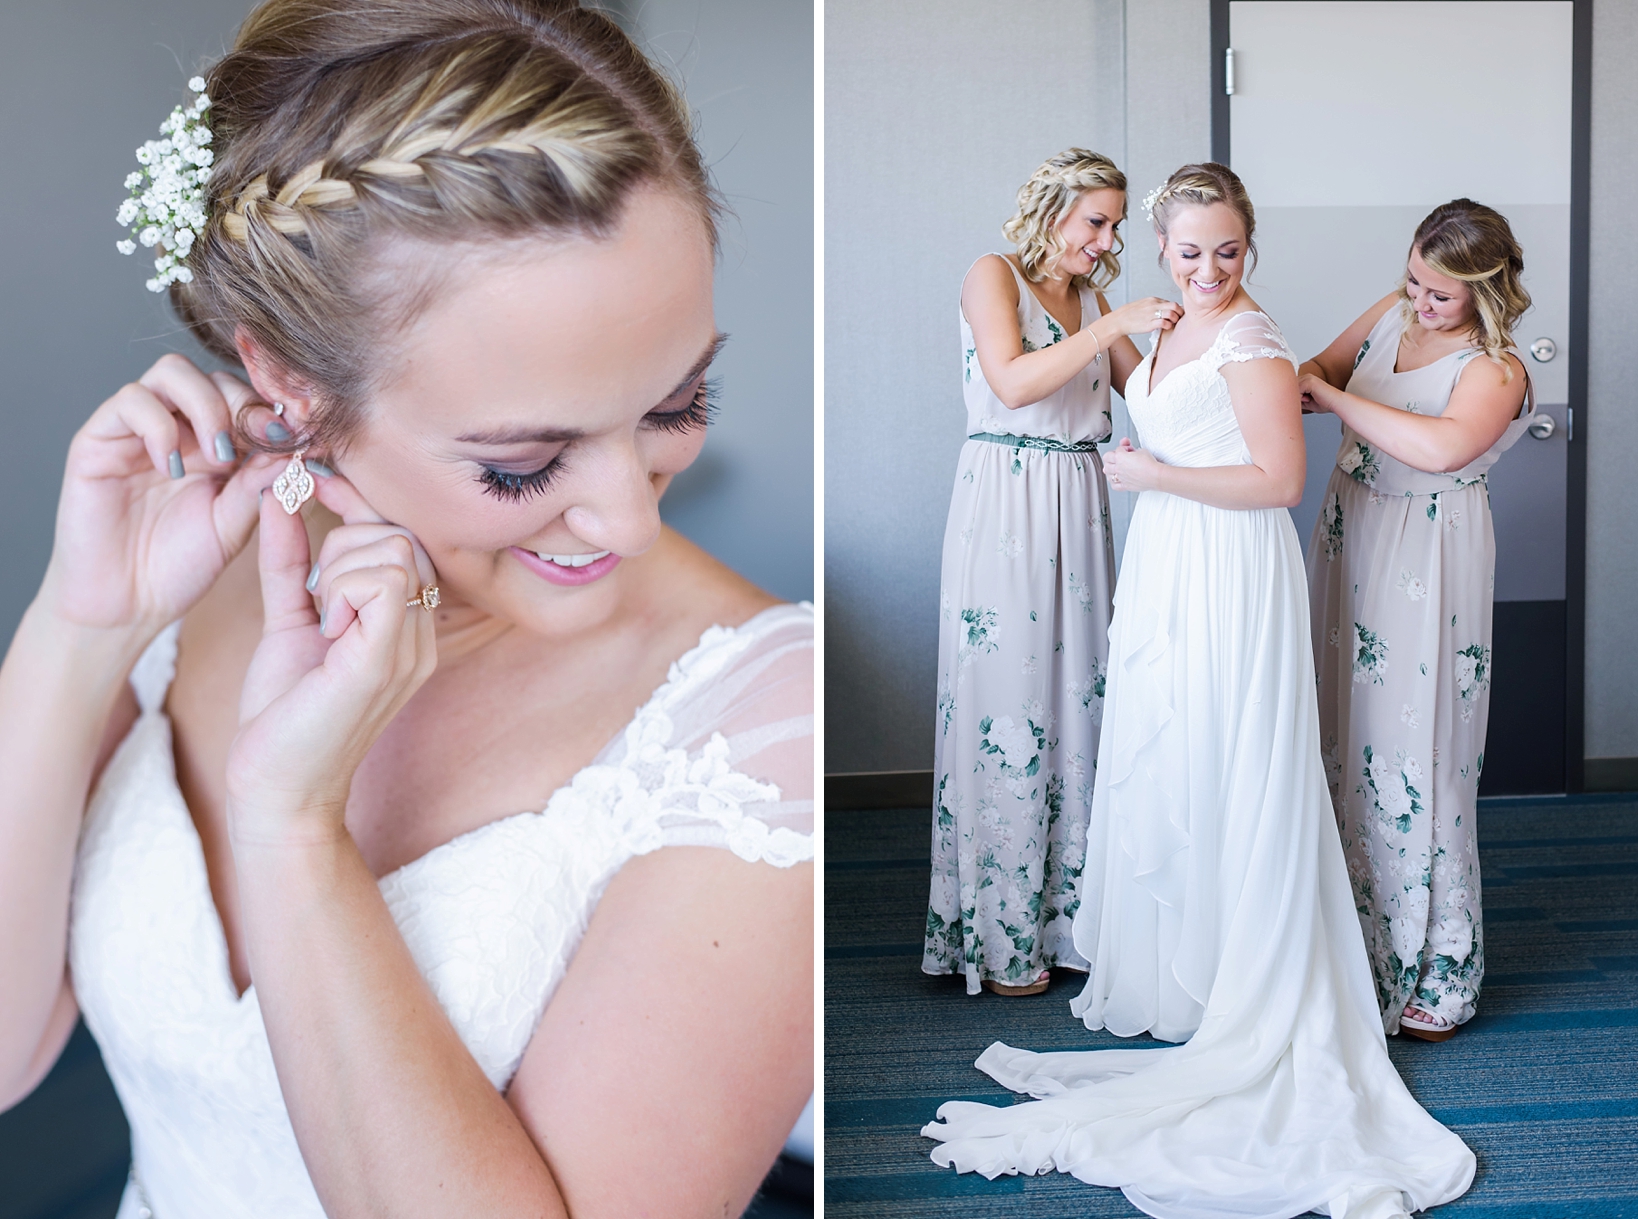 Bride and her bridesmaids getting her ready for the wedding ceremony